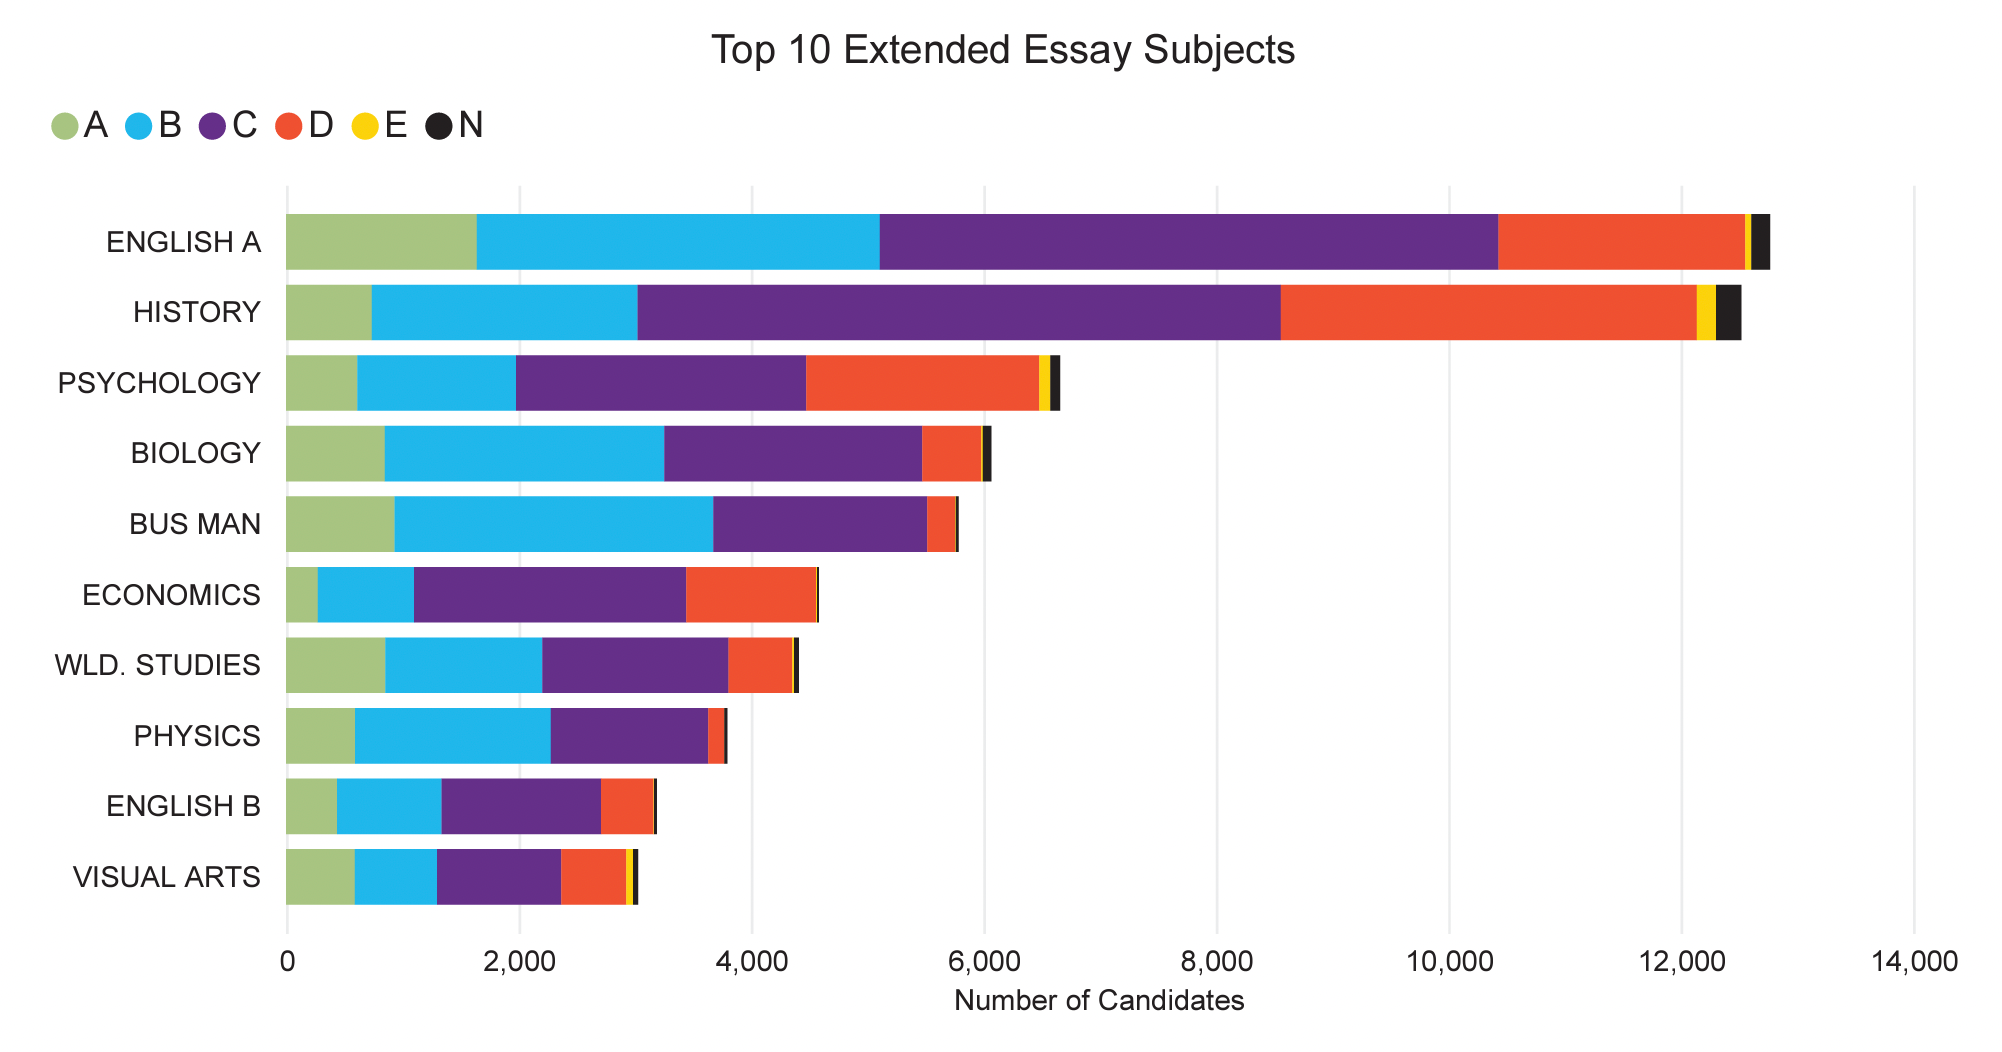 Top 10 IB Extended Essay Subjects in 2022